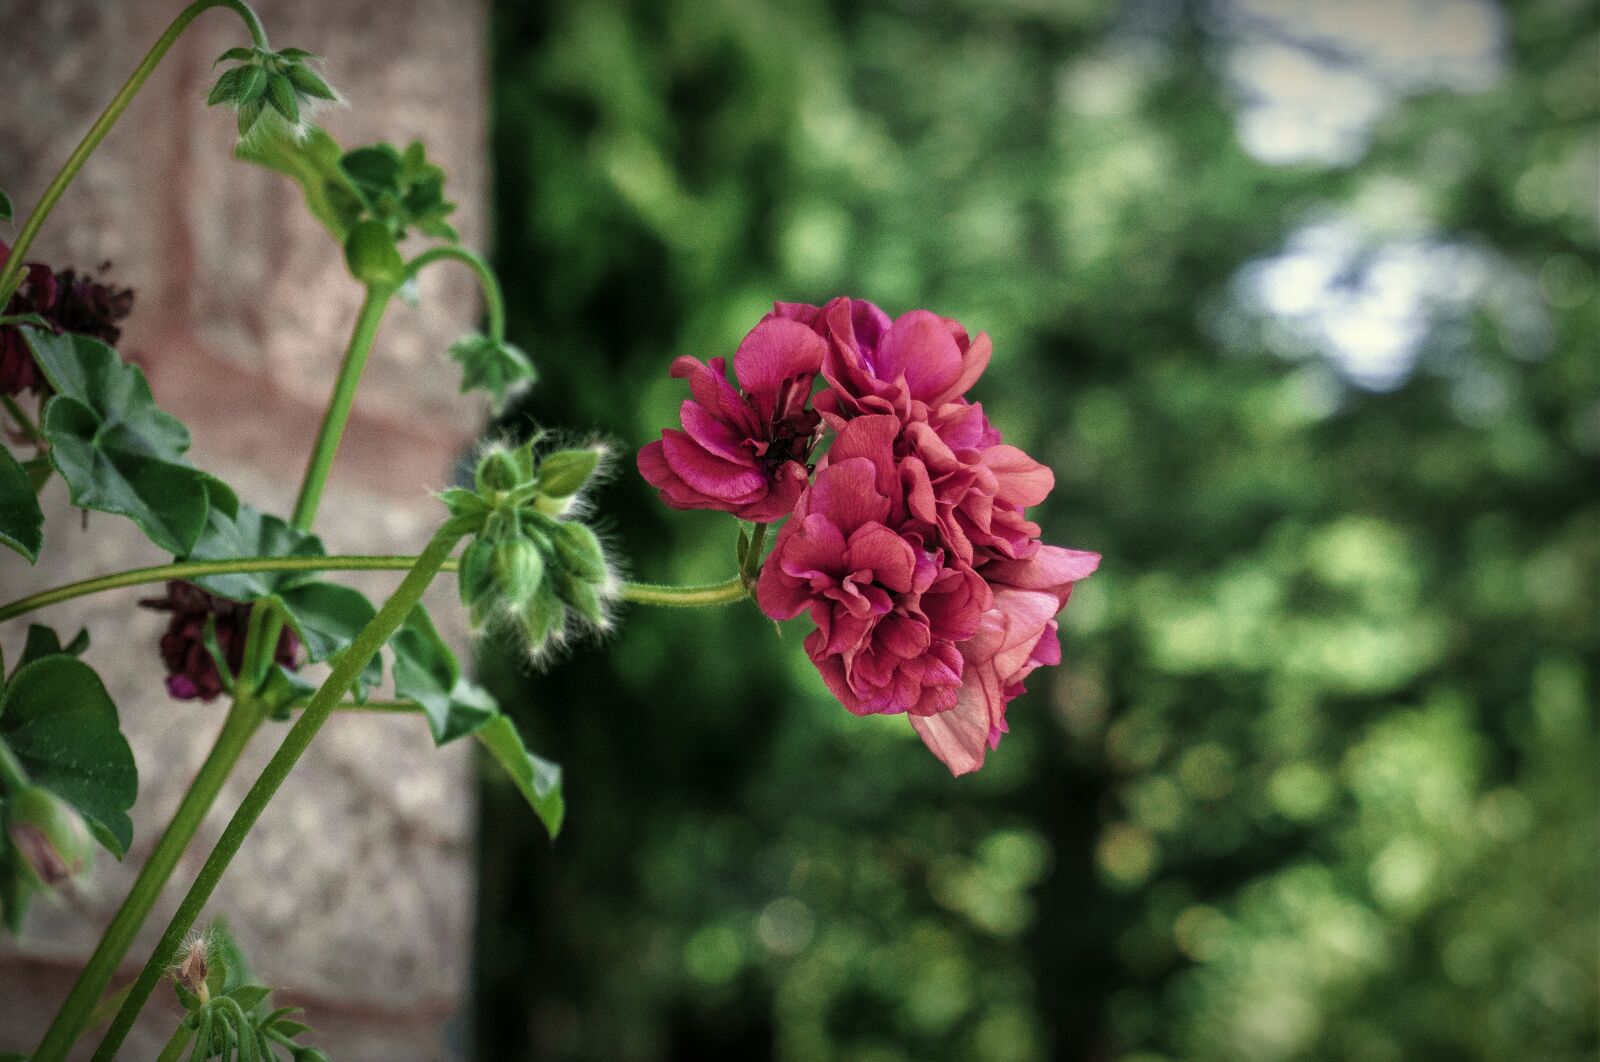 Sony a6000 sample photo. Nature, flowers, garden photography